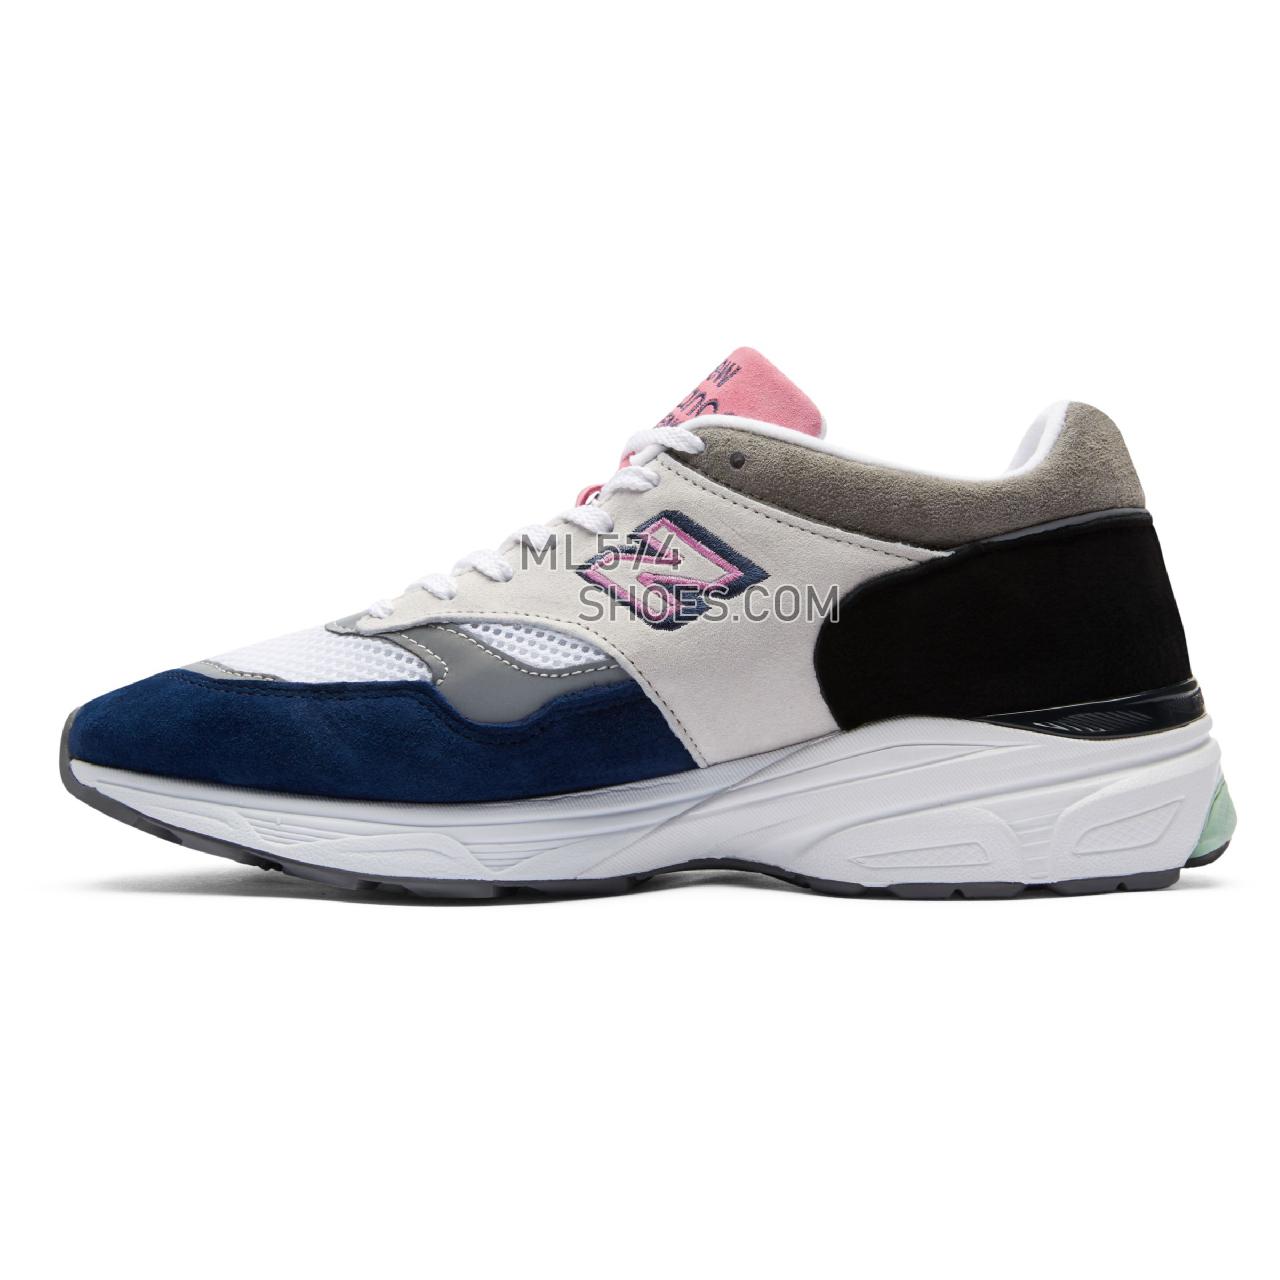 New Balance Made in UK 1500.9 - Men's Made in UK 1500.9 ML15009V1-27795 - White with Navy and Black - M15009FR